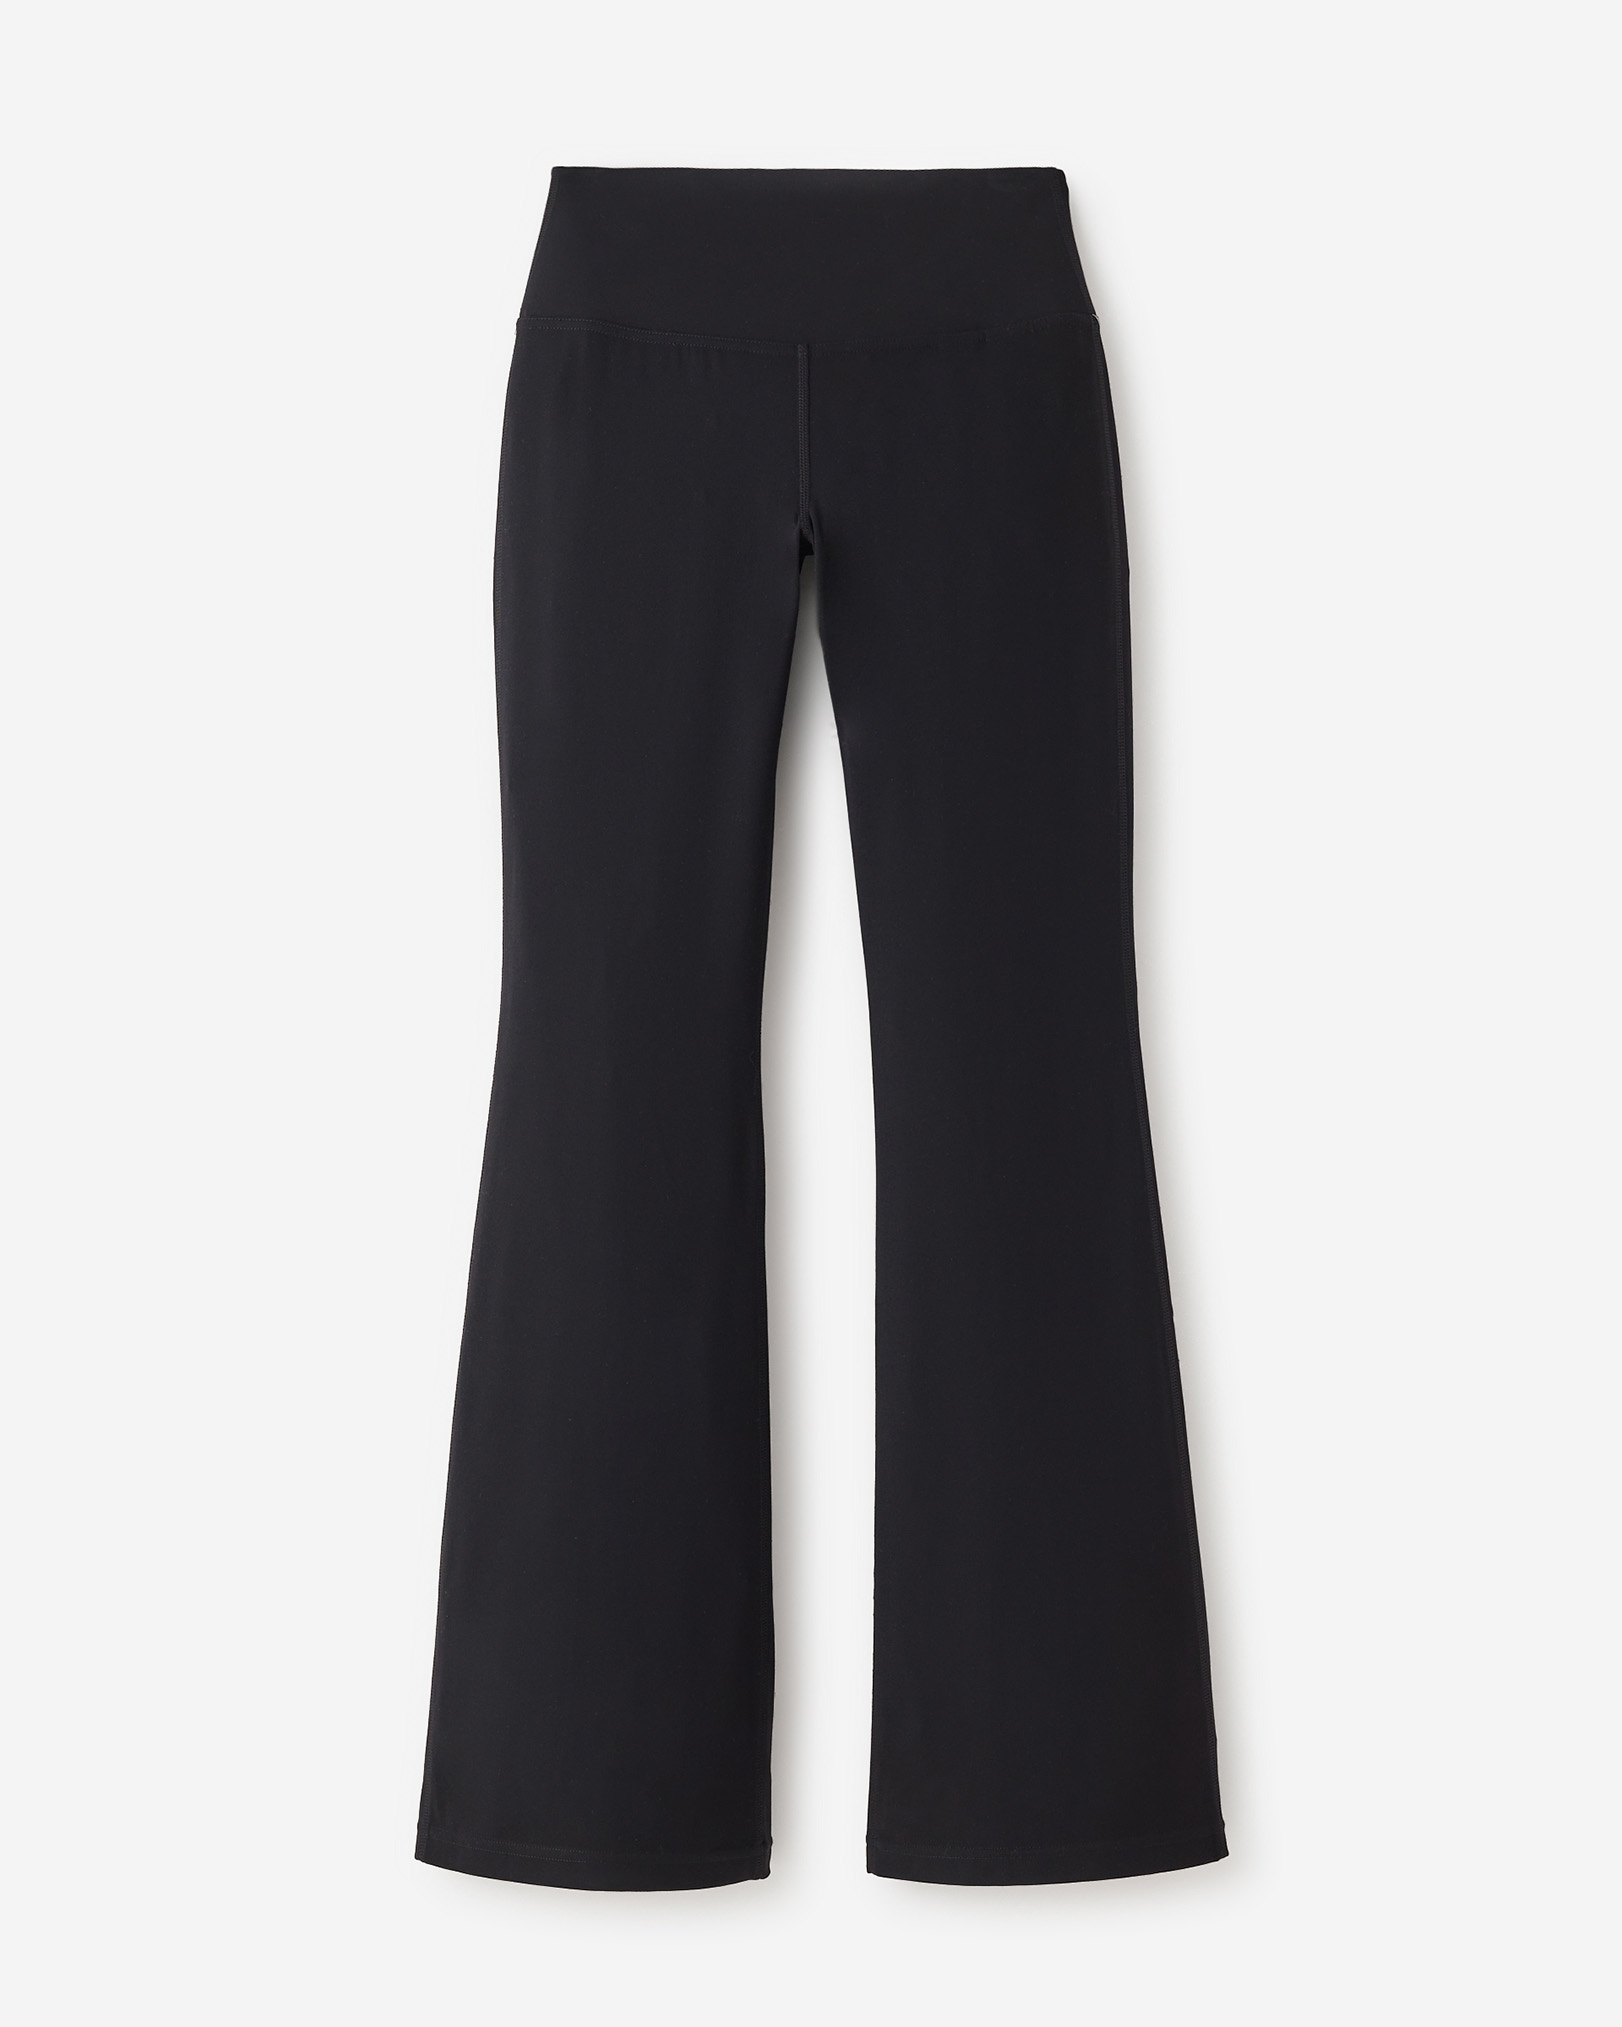 Roots Restore High Rise Flare Legging Pants in